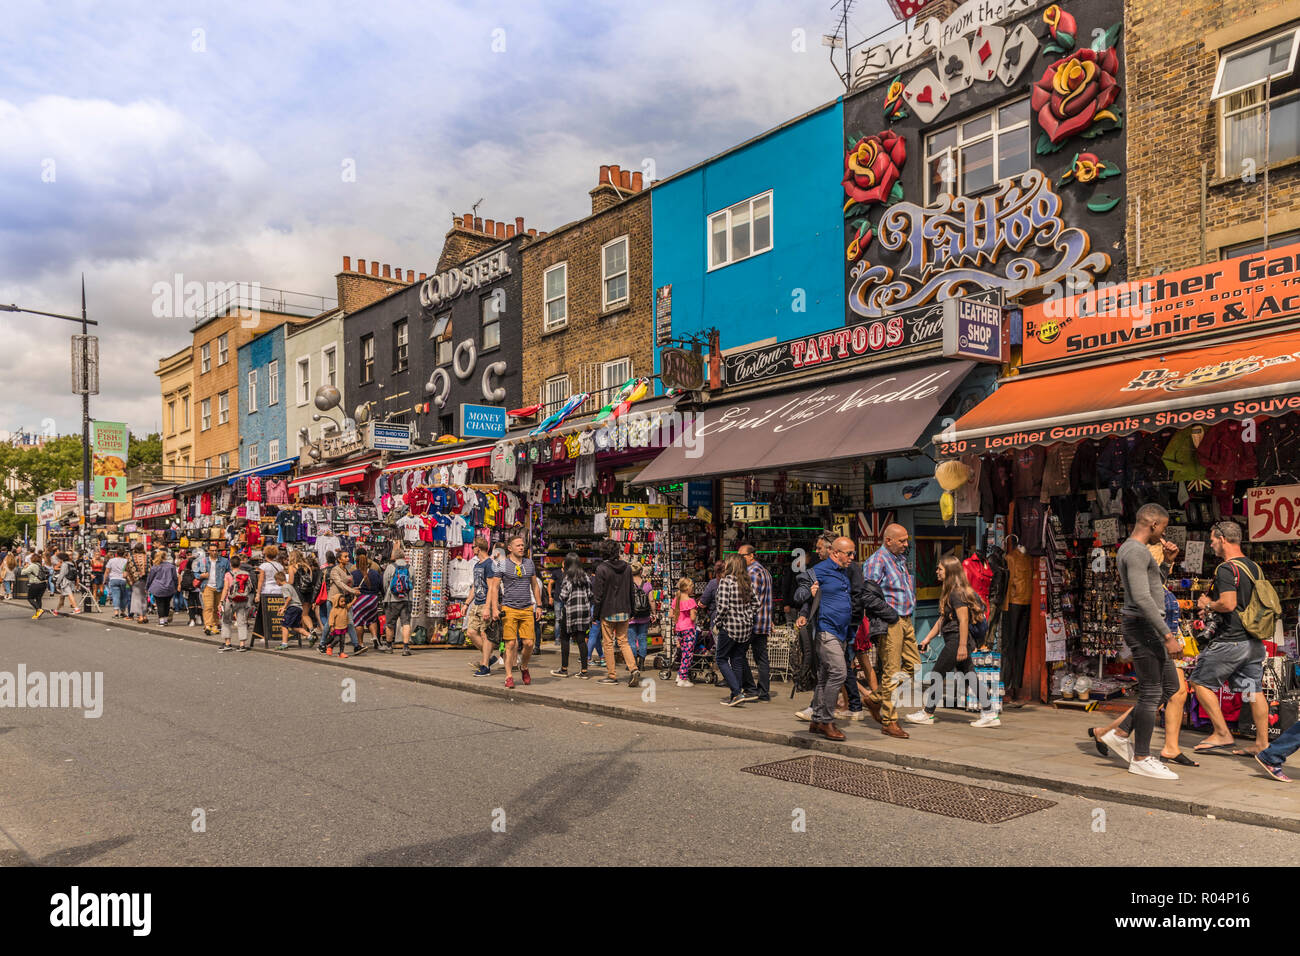 Some of the typically colourful stores on Camden High Street in Camden, London, England, United Kingdom, Europe Stock Photo